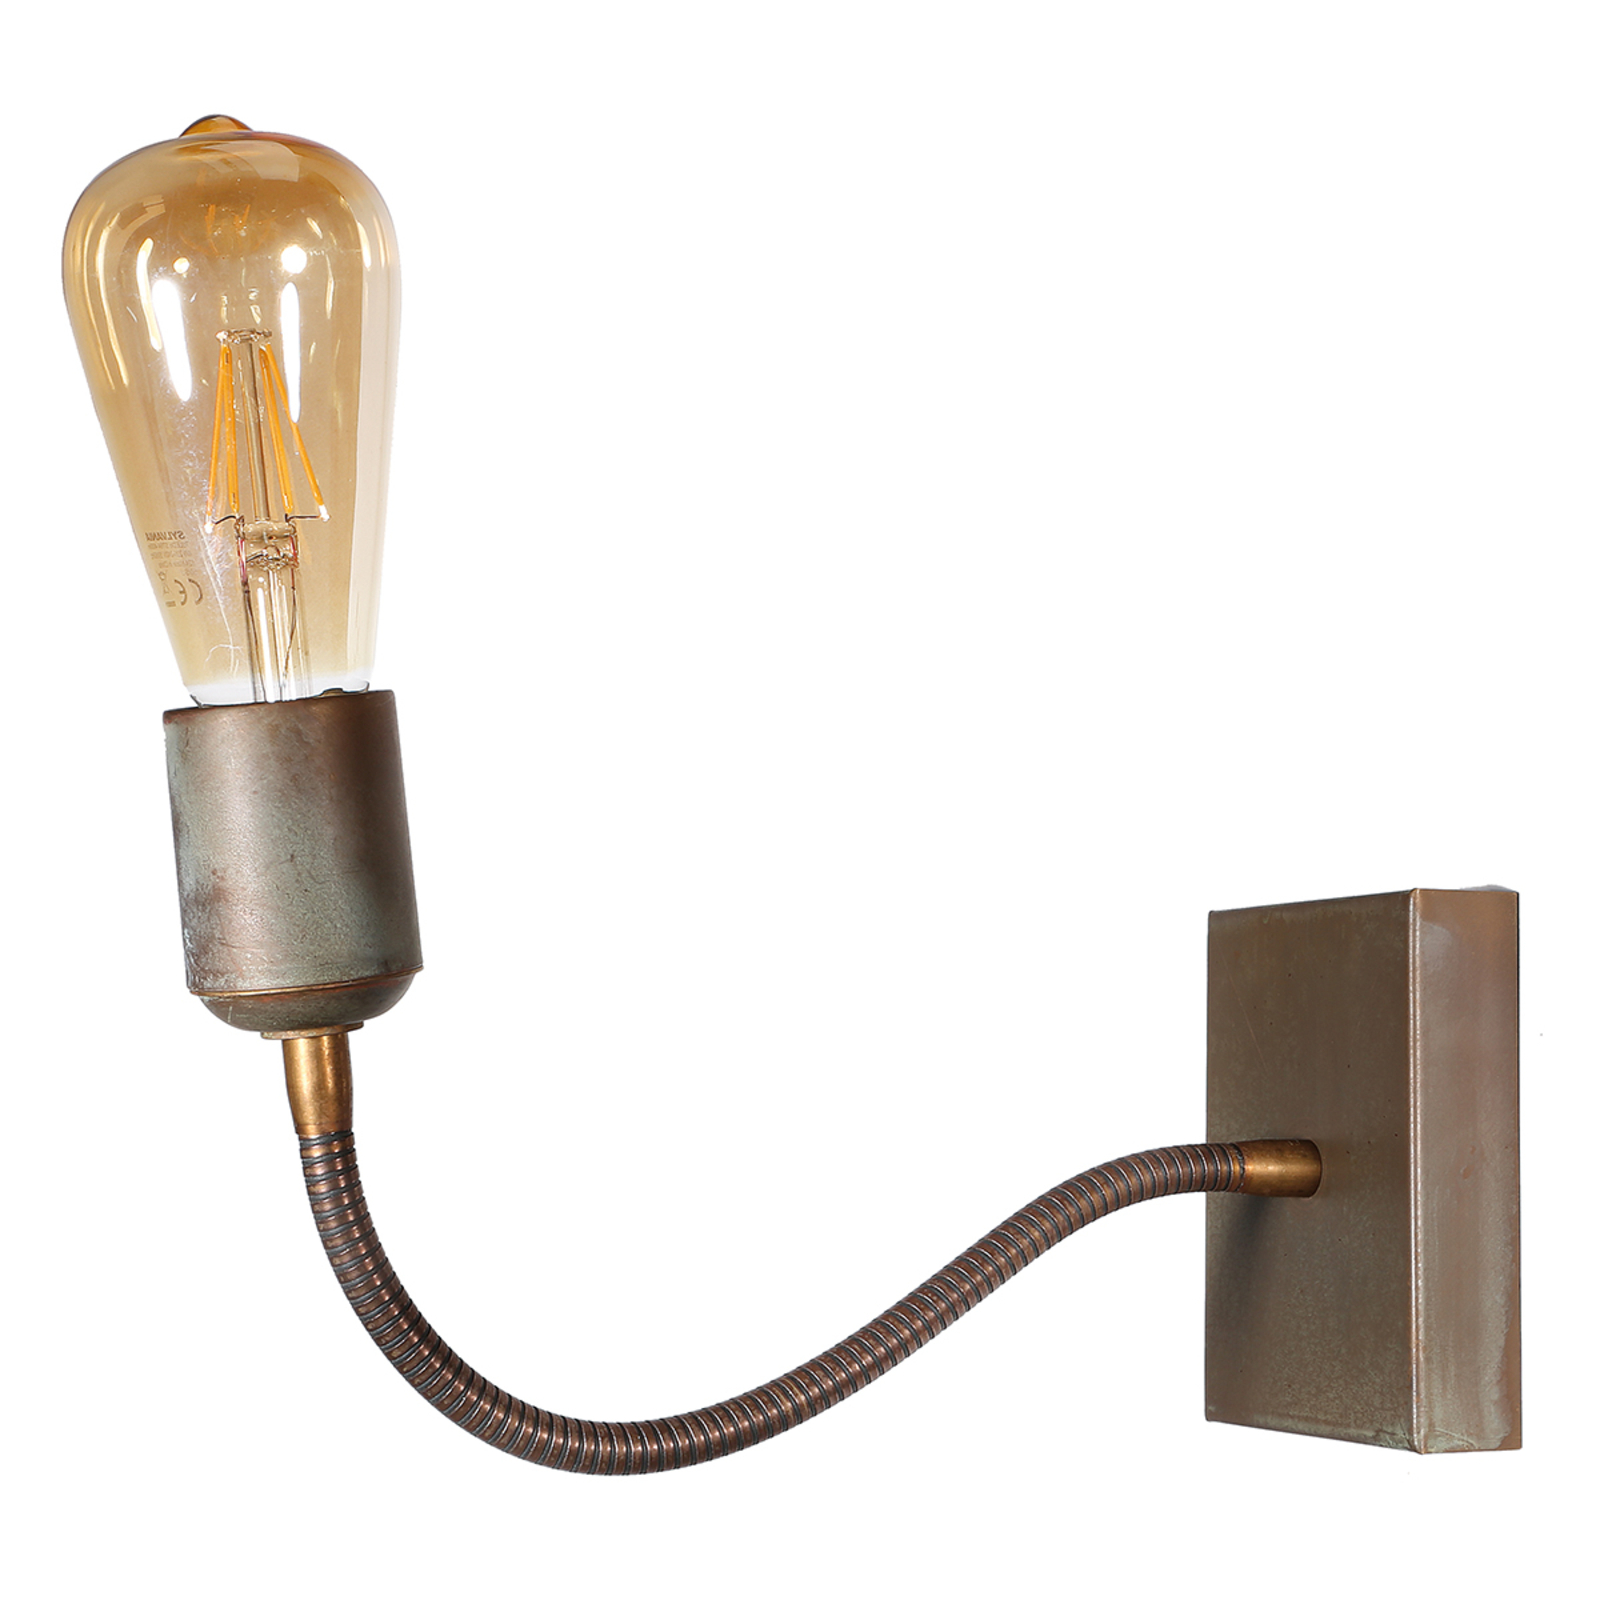 With flexible arm - Orio wall lamp made of Mite